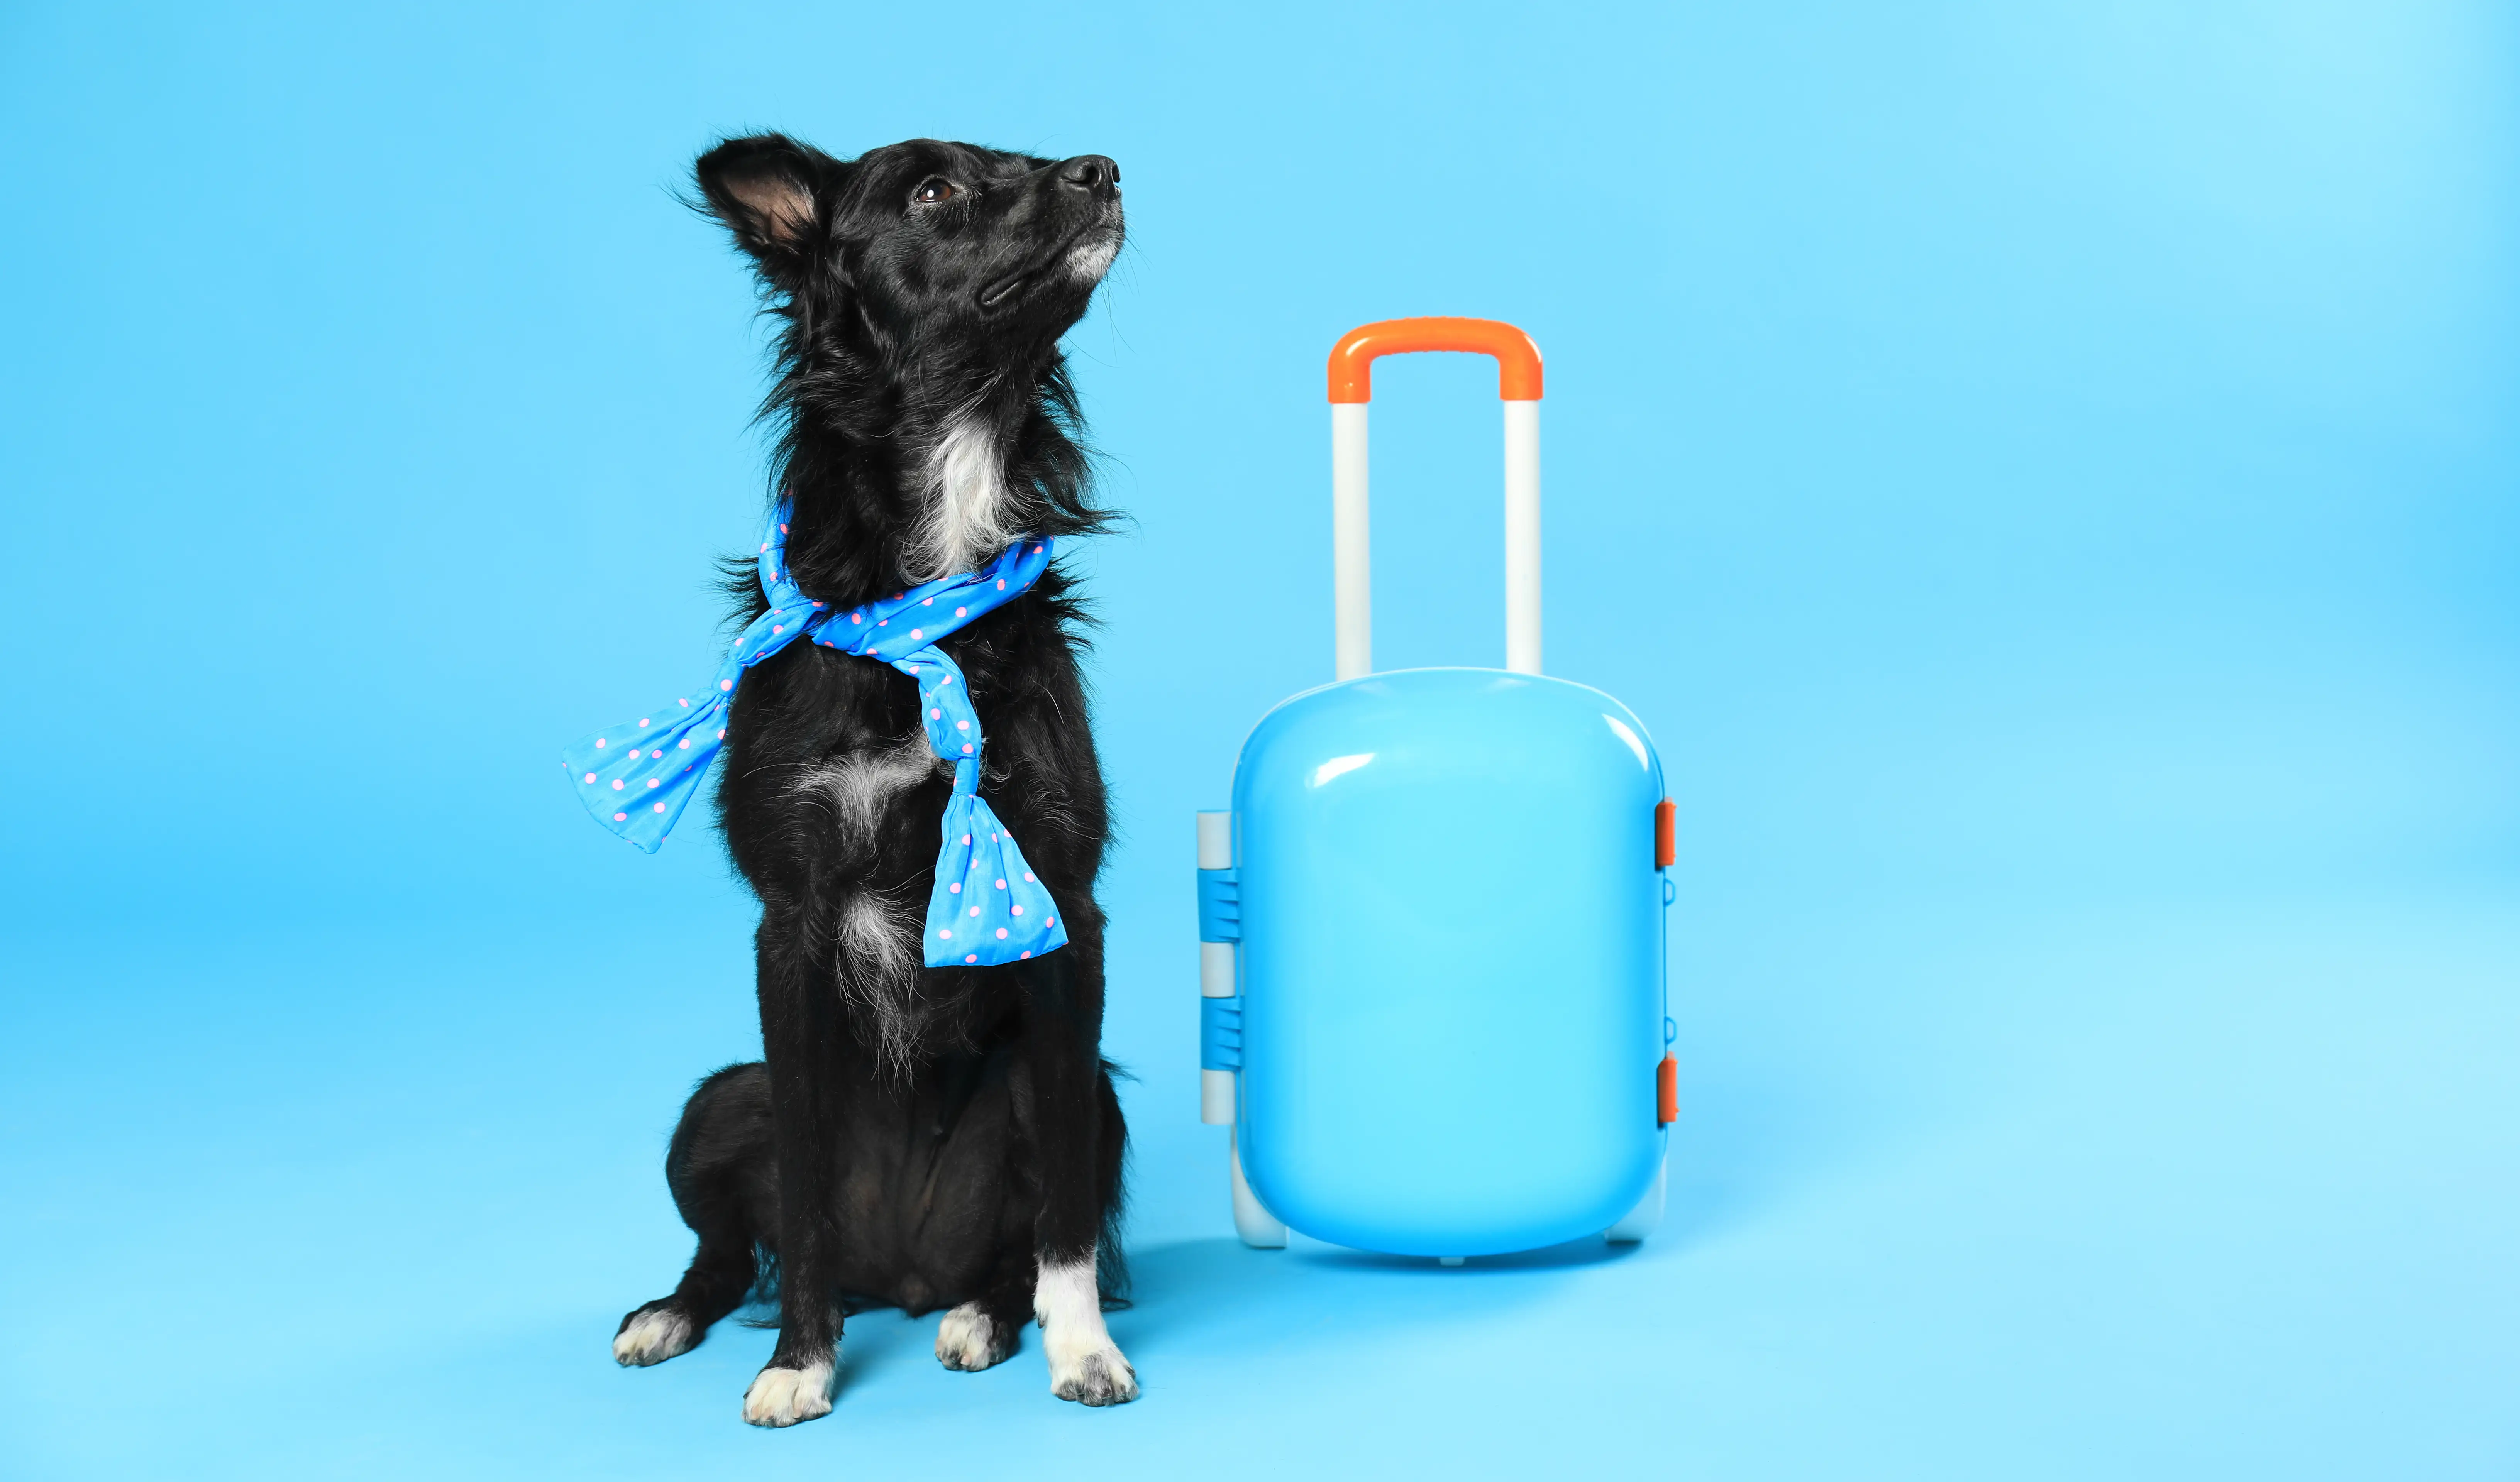 Dog with small suitcase on a blue background